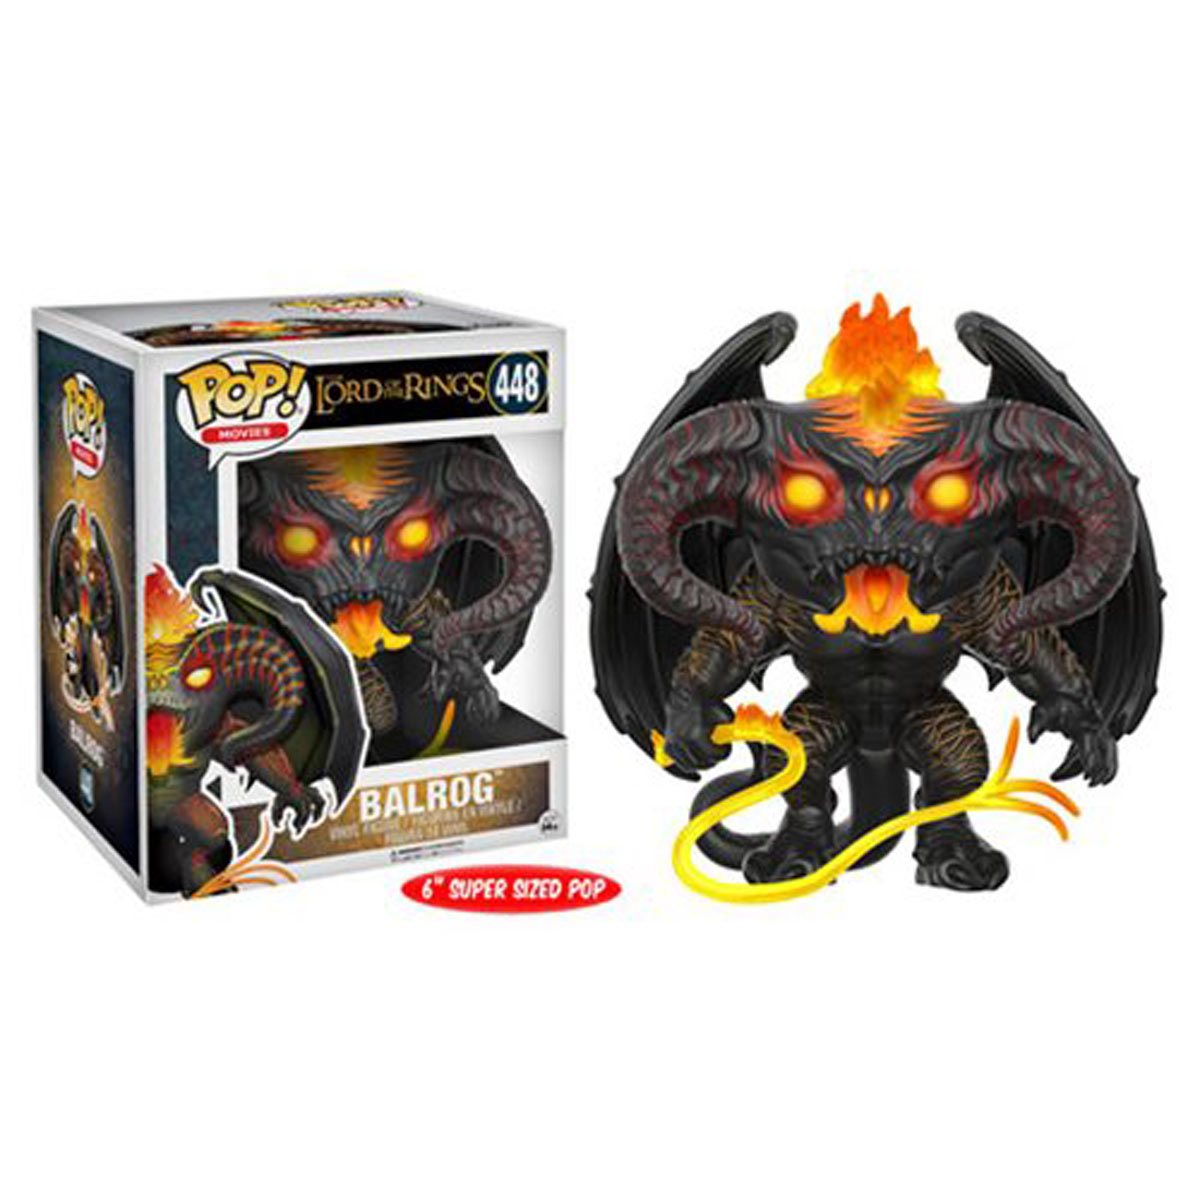 Funko POP! The Lord of the Rings: Balrog Figure 6-Inch Vinyl Figure